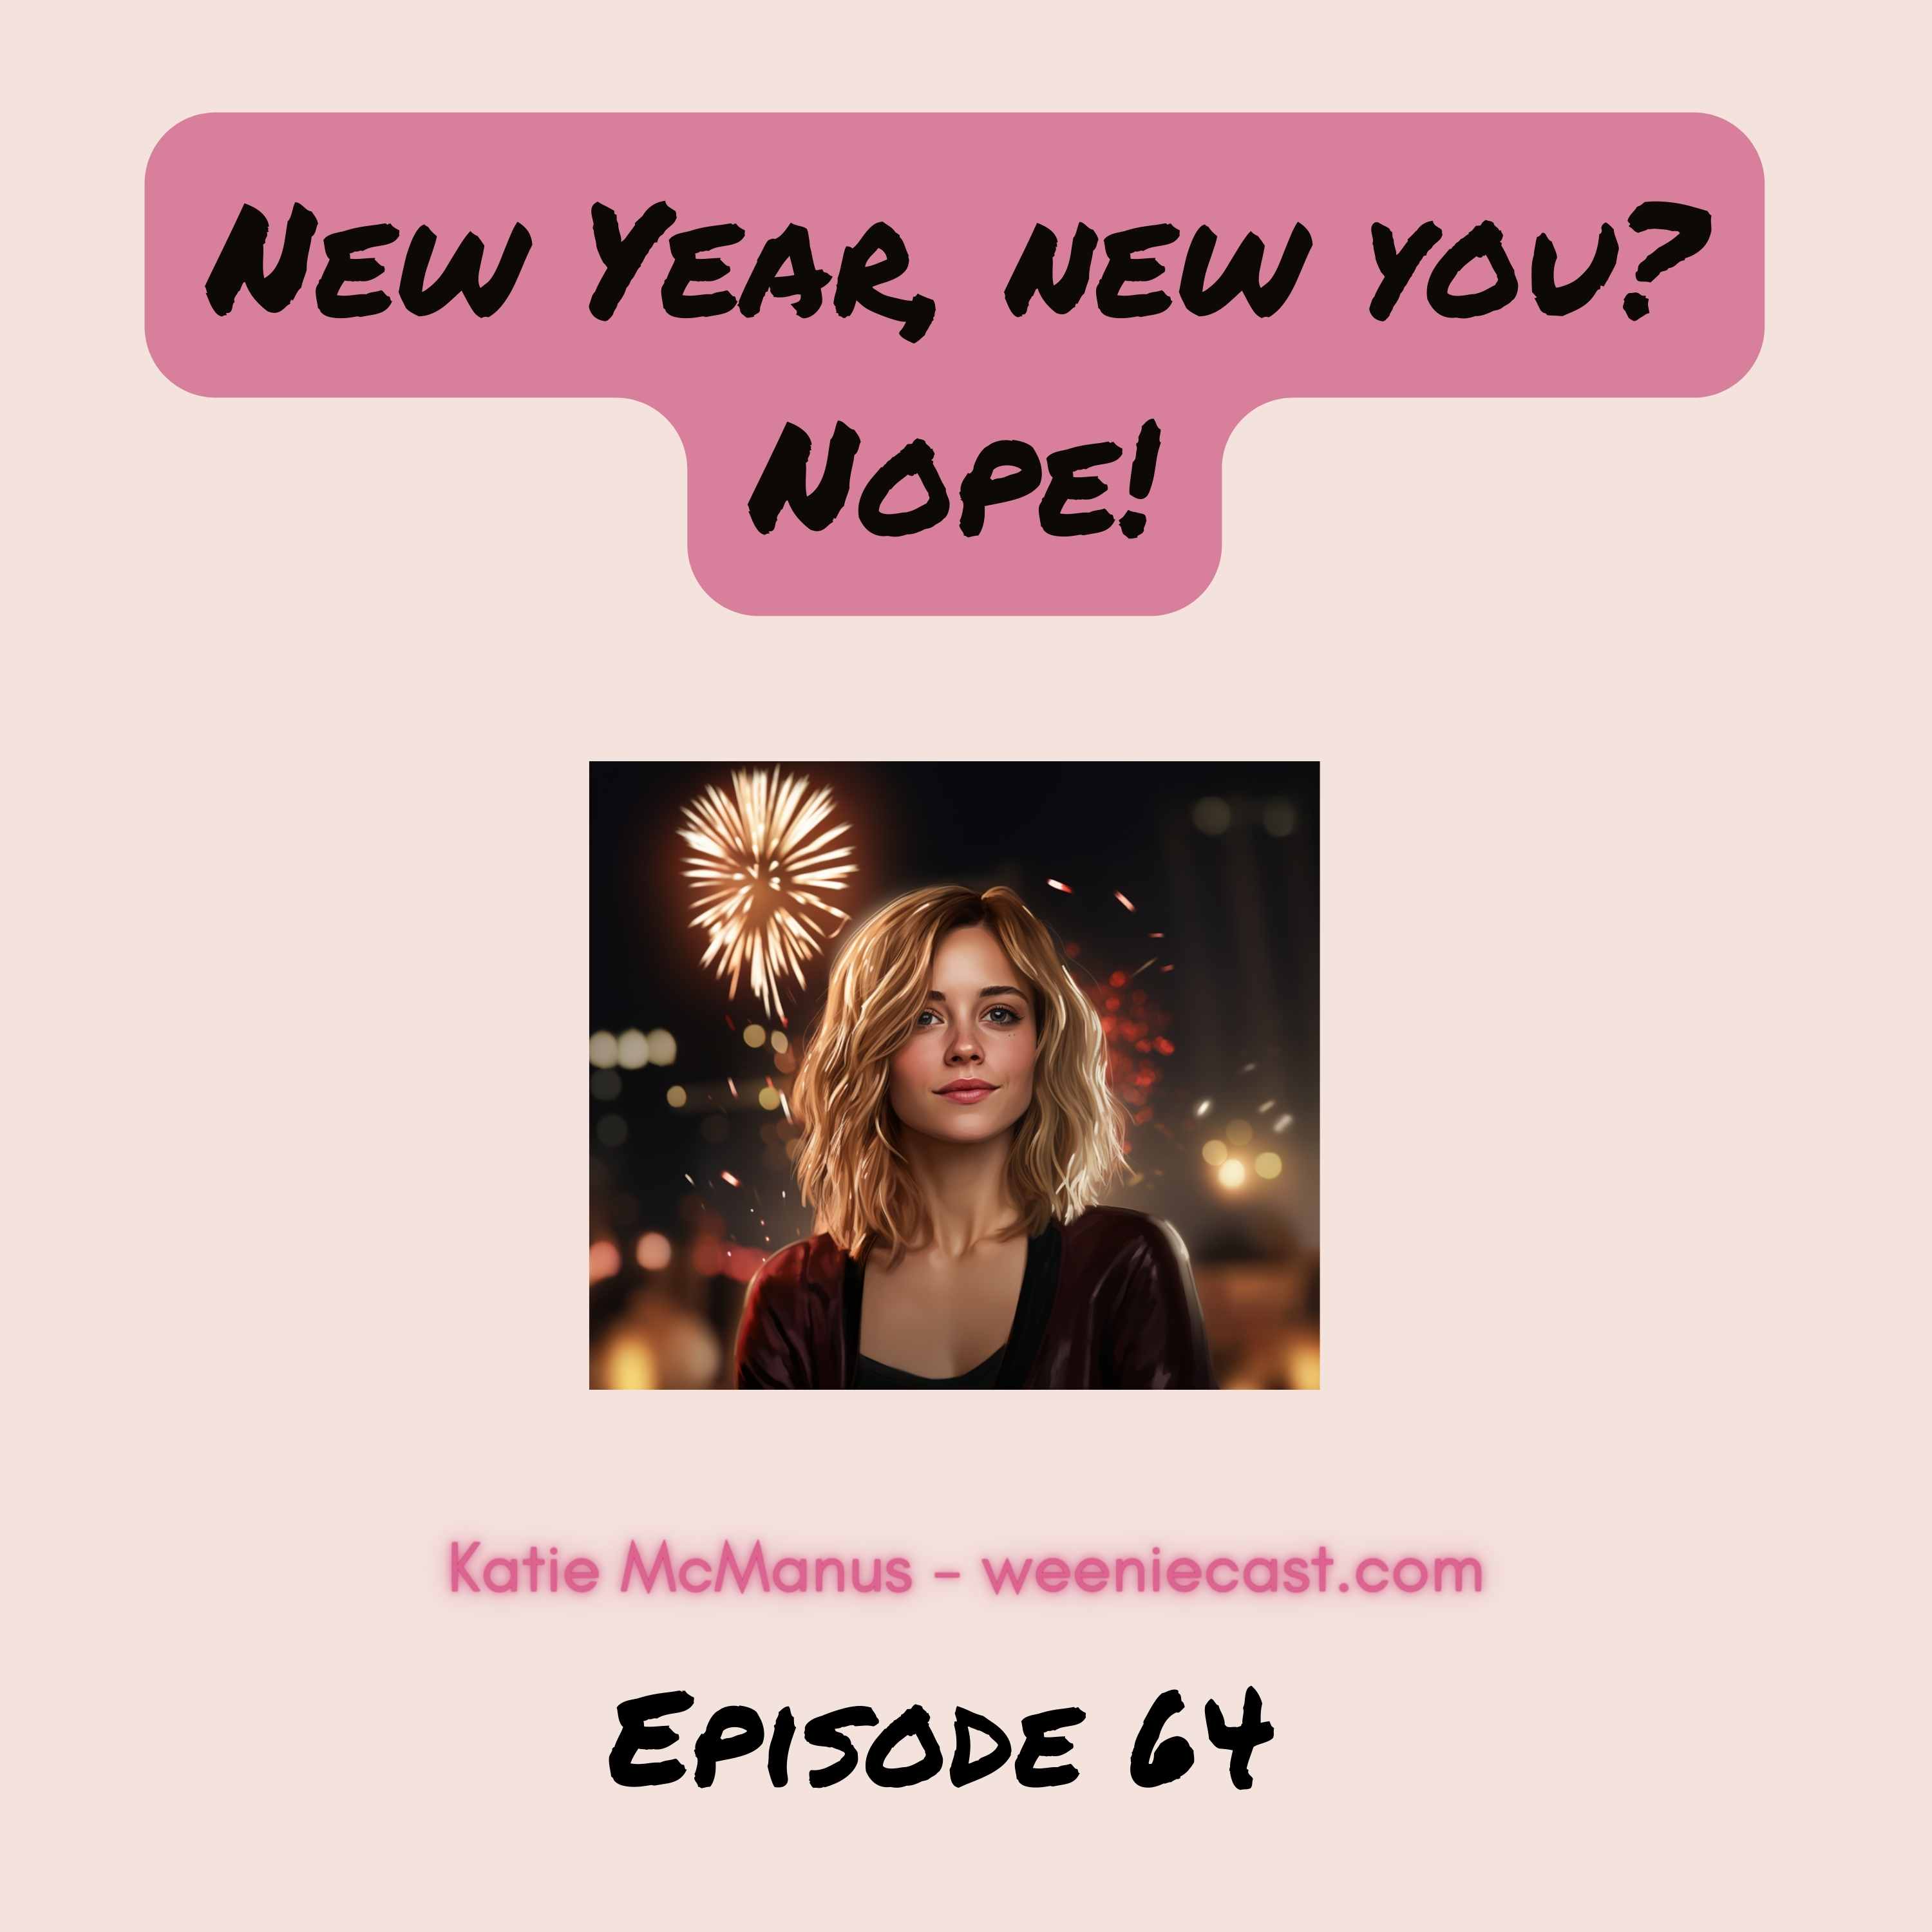 New Year, new you? Nope! Not for ADHD entrepreneurs. Here's why!